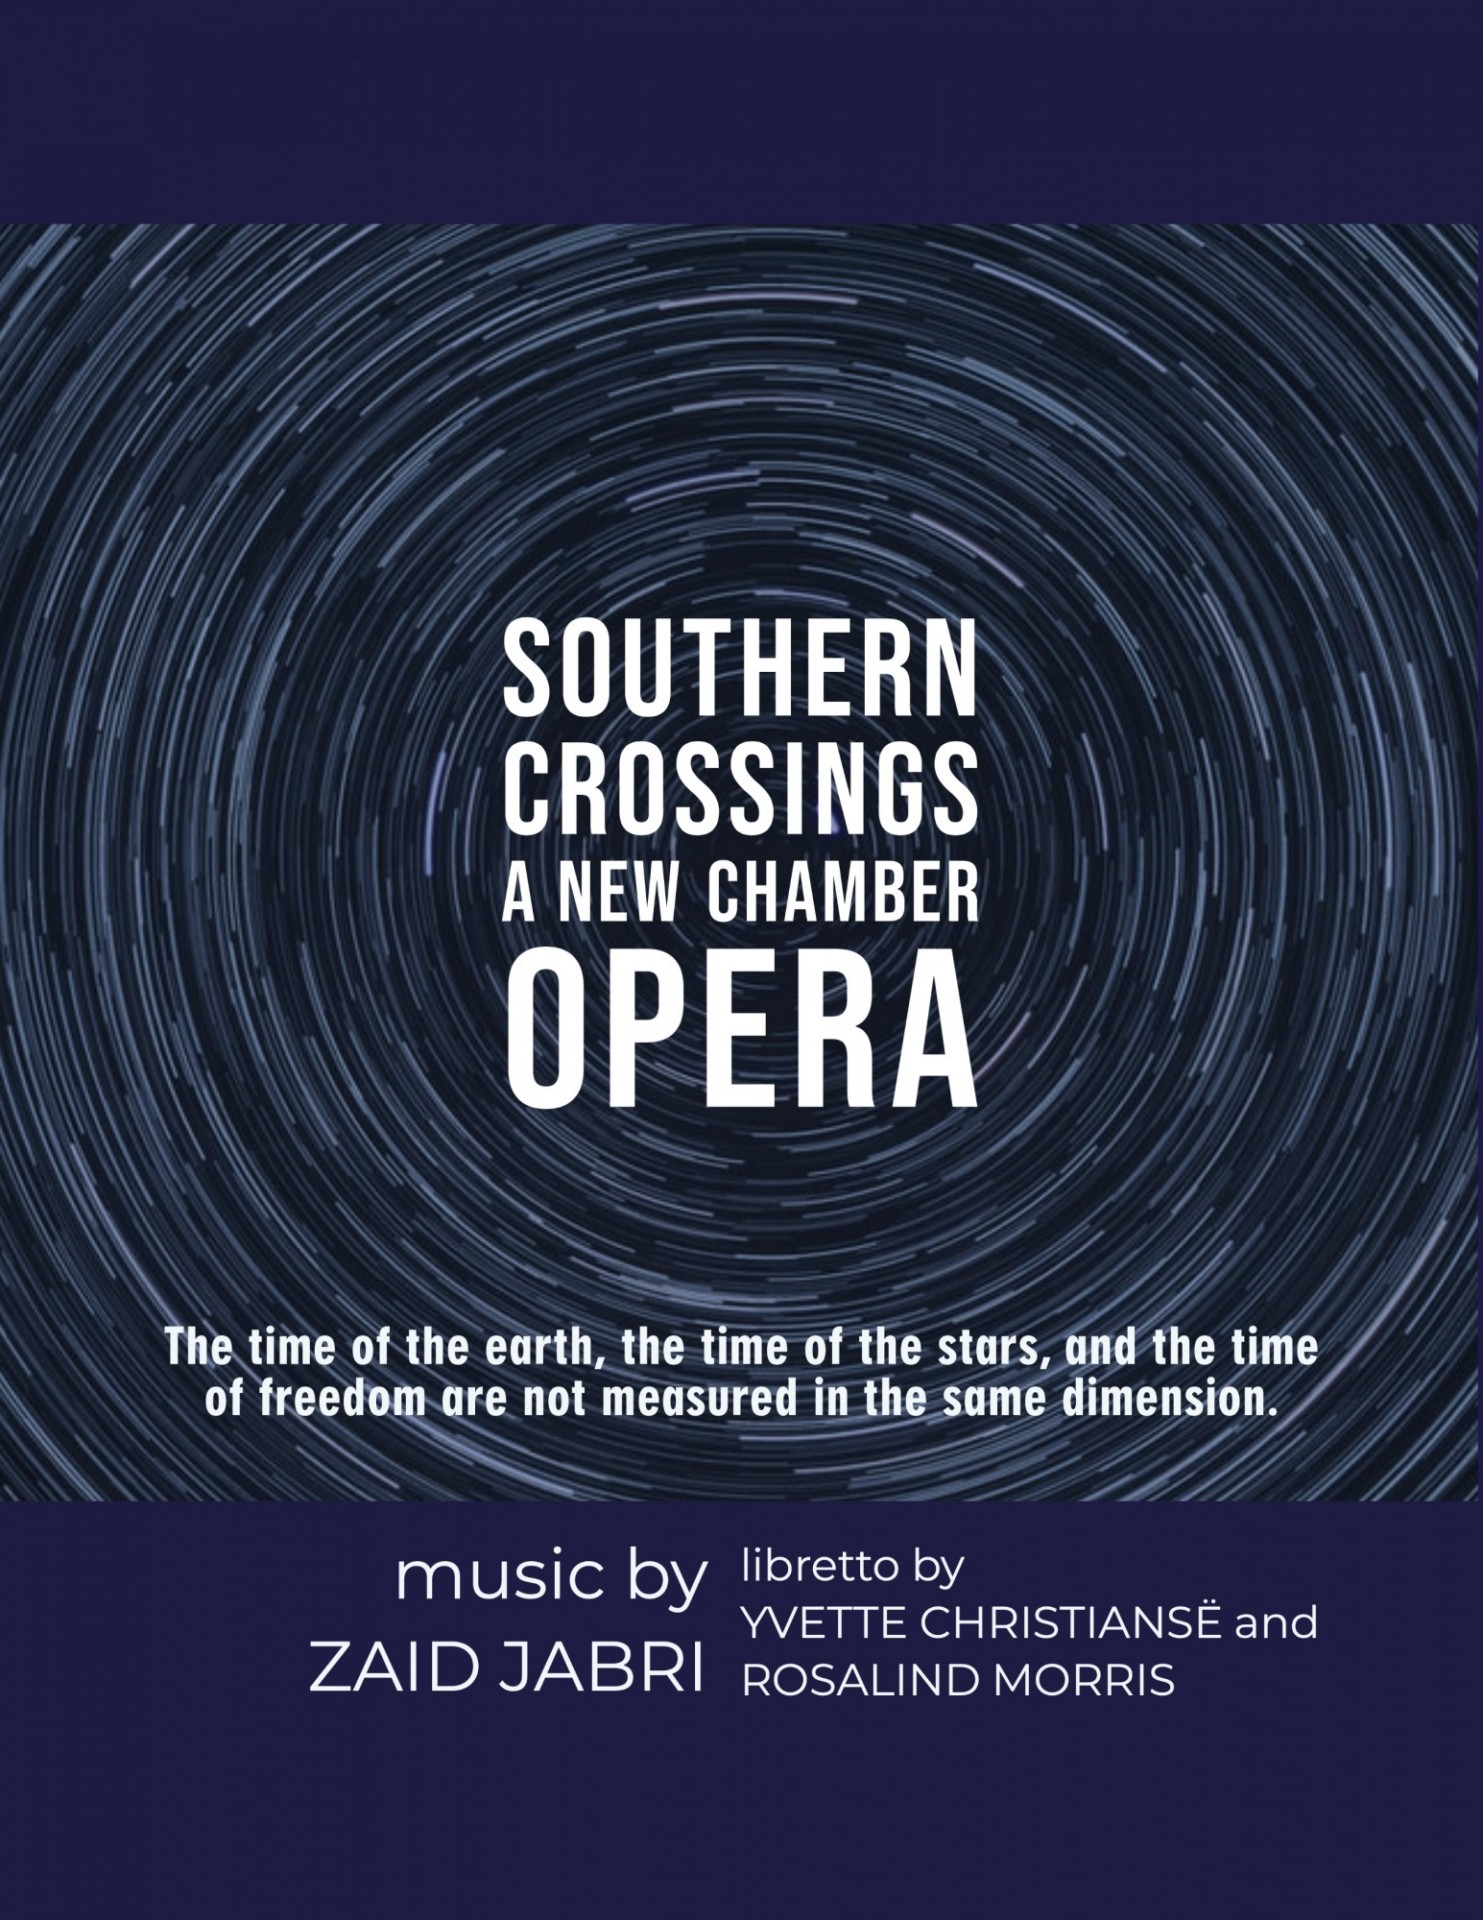 Poster, Southern Crossings opera, with tag line, 'The time of the earth, the time of the stars, and the time of freedom are not measured in the same dimension,' with Music by Zaid Jabri, Libretto by Yvette Christiansë and Rosalind Morris